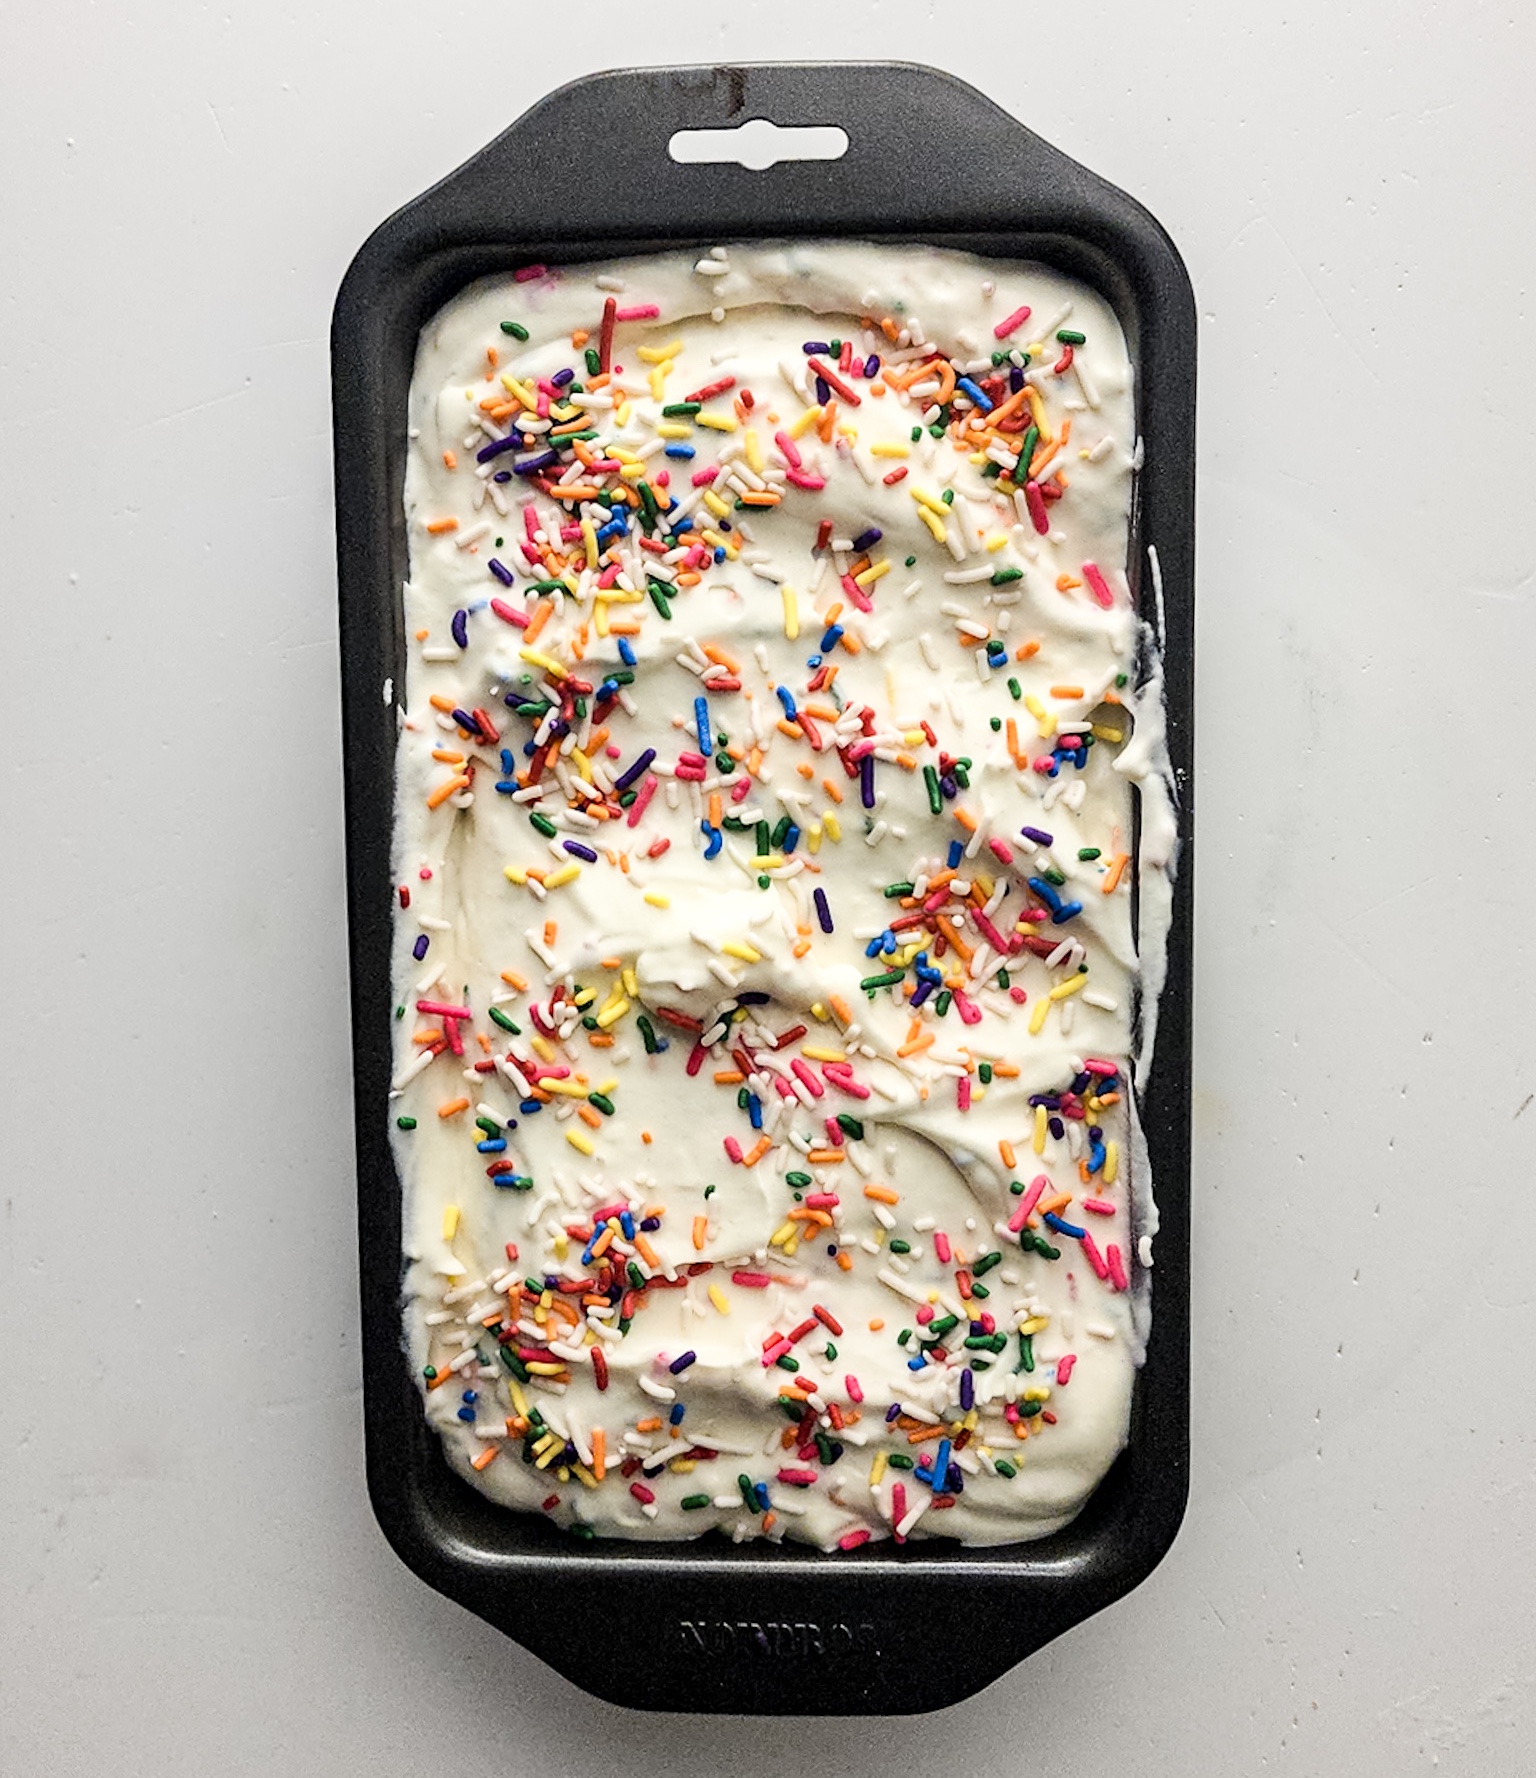 Ice cream added to a metal pan and topped with sprinkles